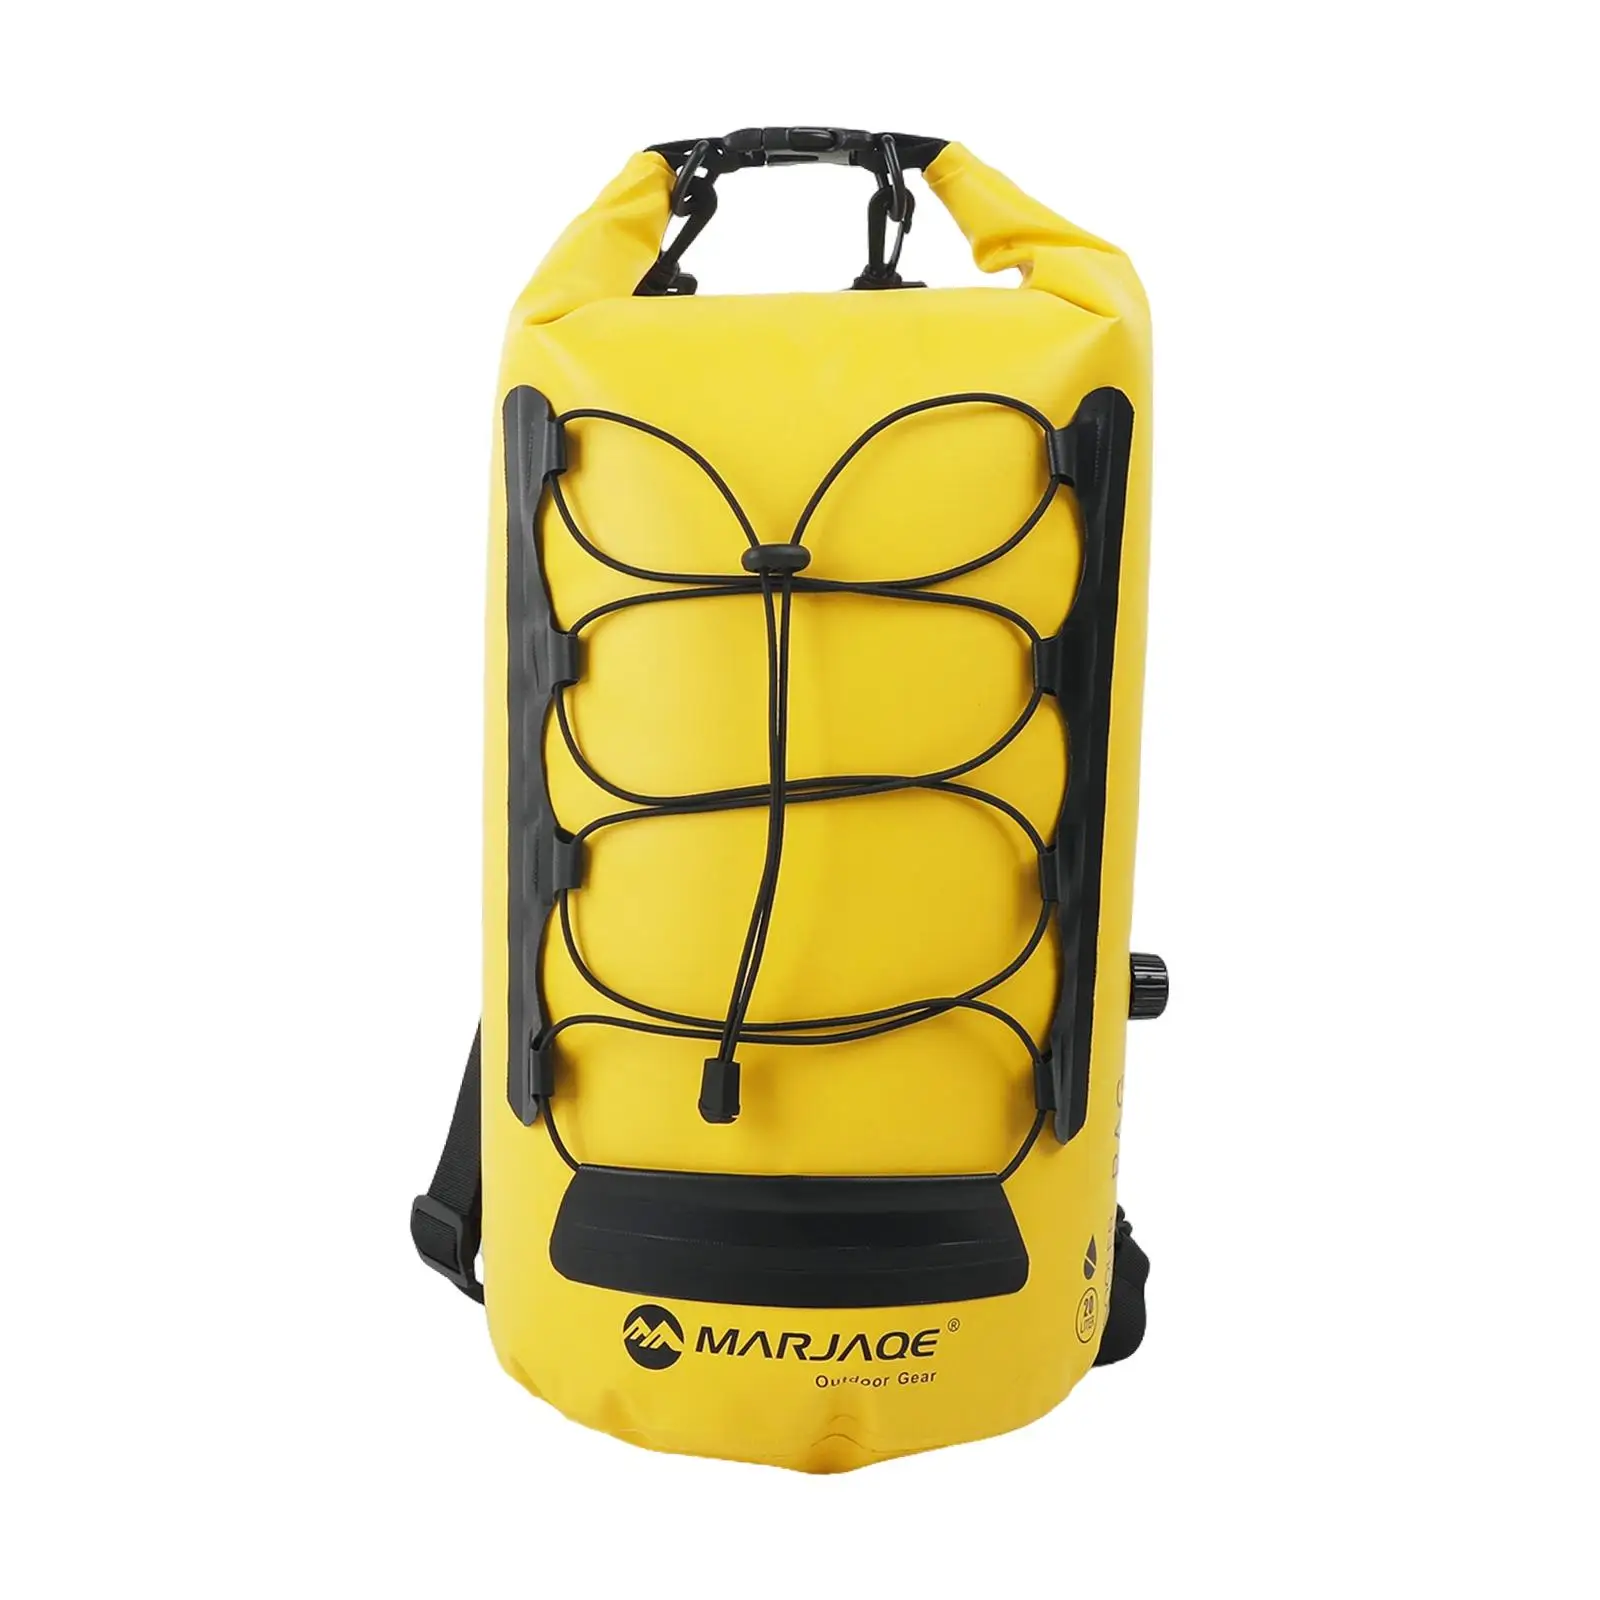 Waterproof Bag Backpack 20L Carrying Bag Double Shoulder Strap Floating Bags for Sailing Swimming River Trekking Camping Outdoor